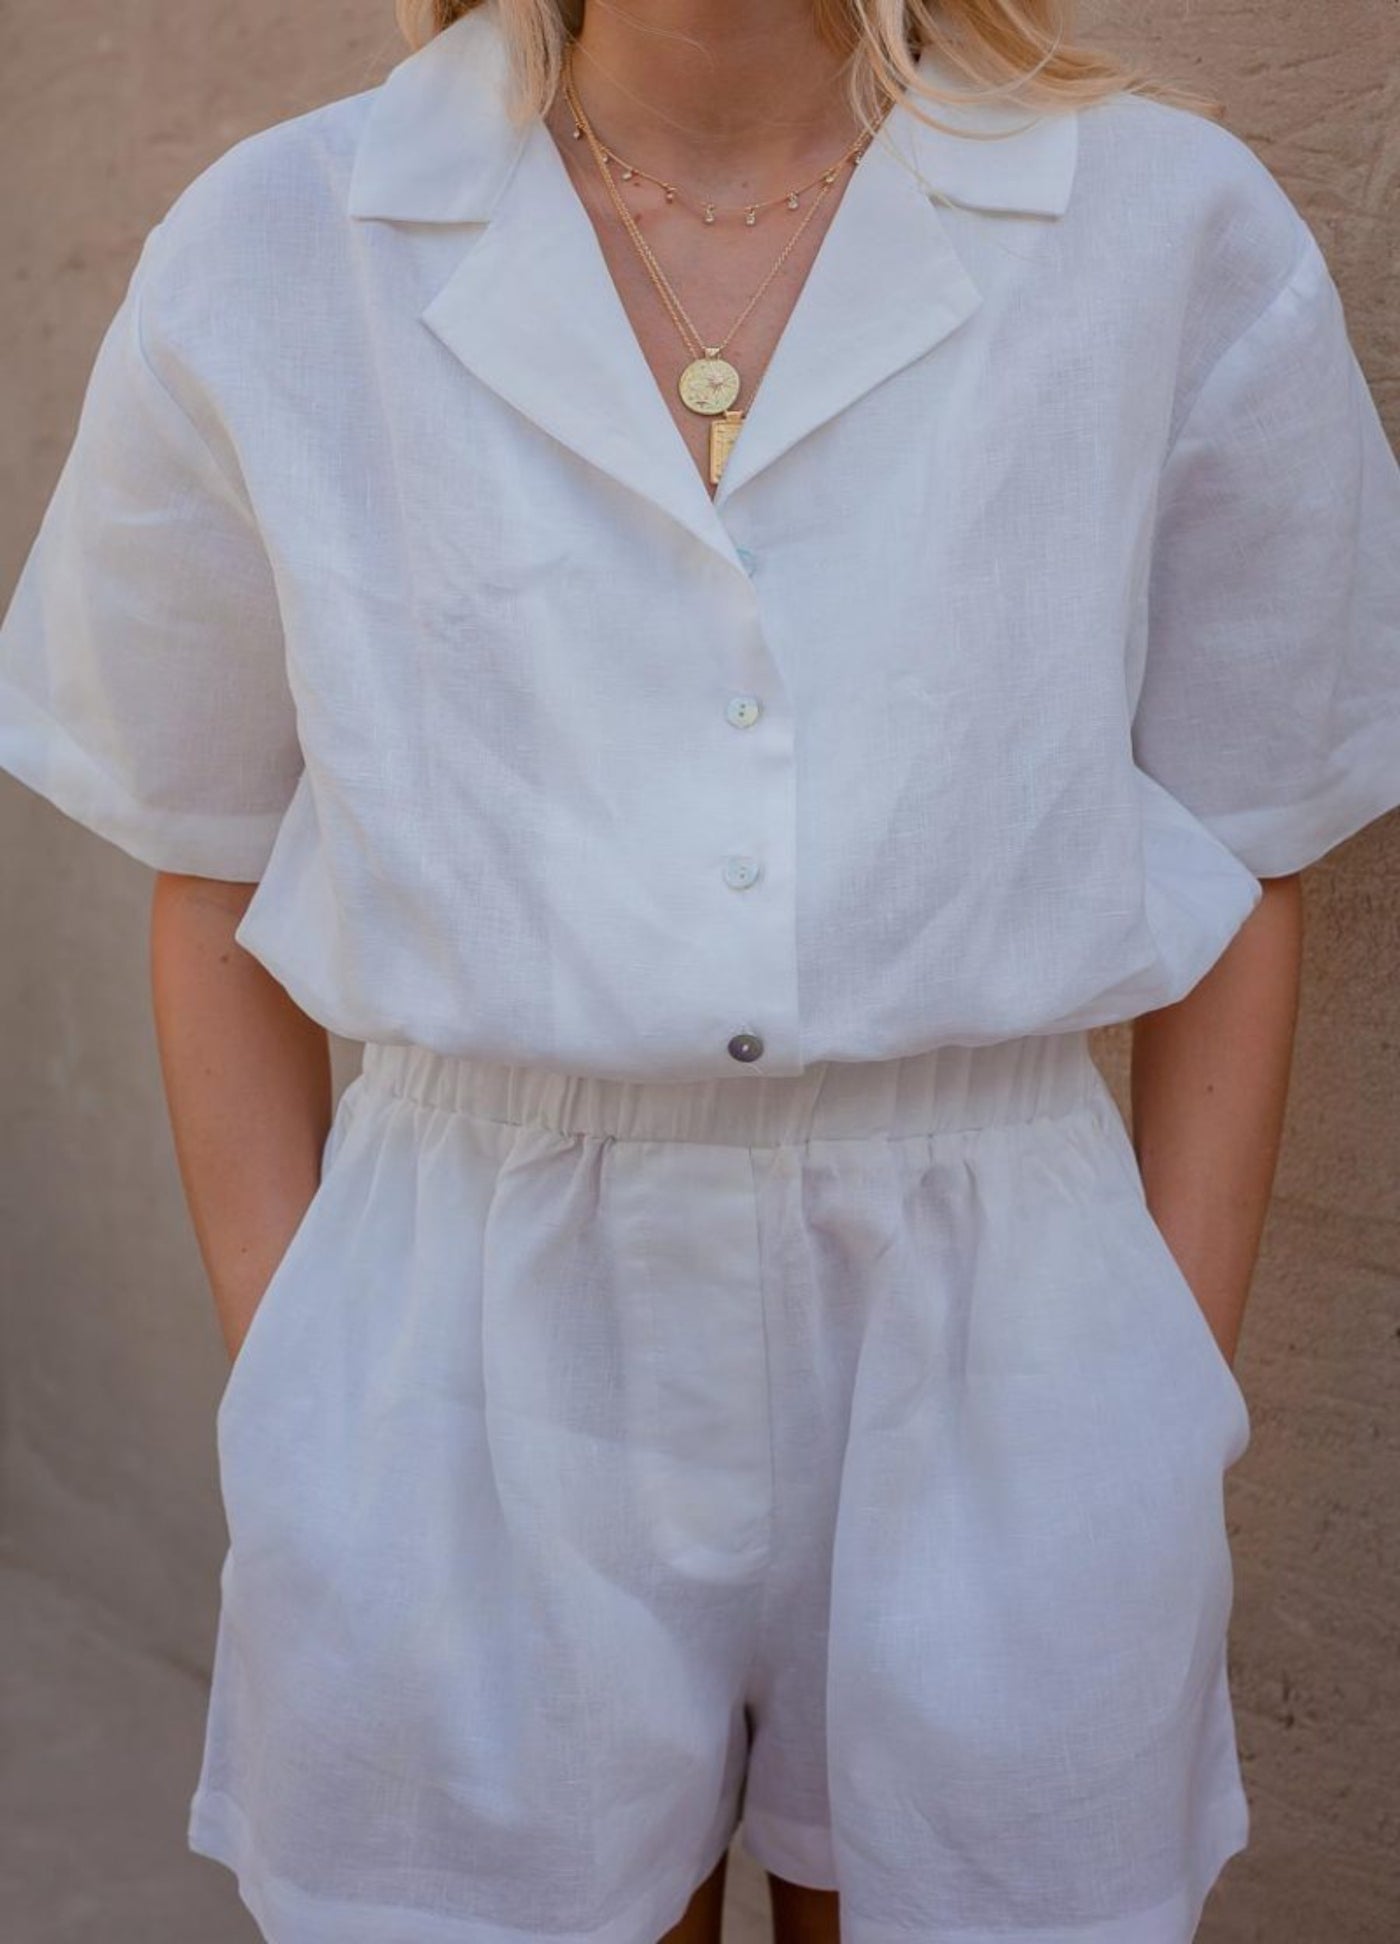 Blonde woman wearing white playsuit in 100% linen